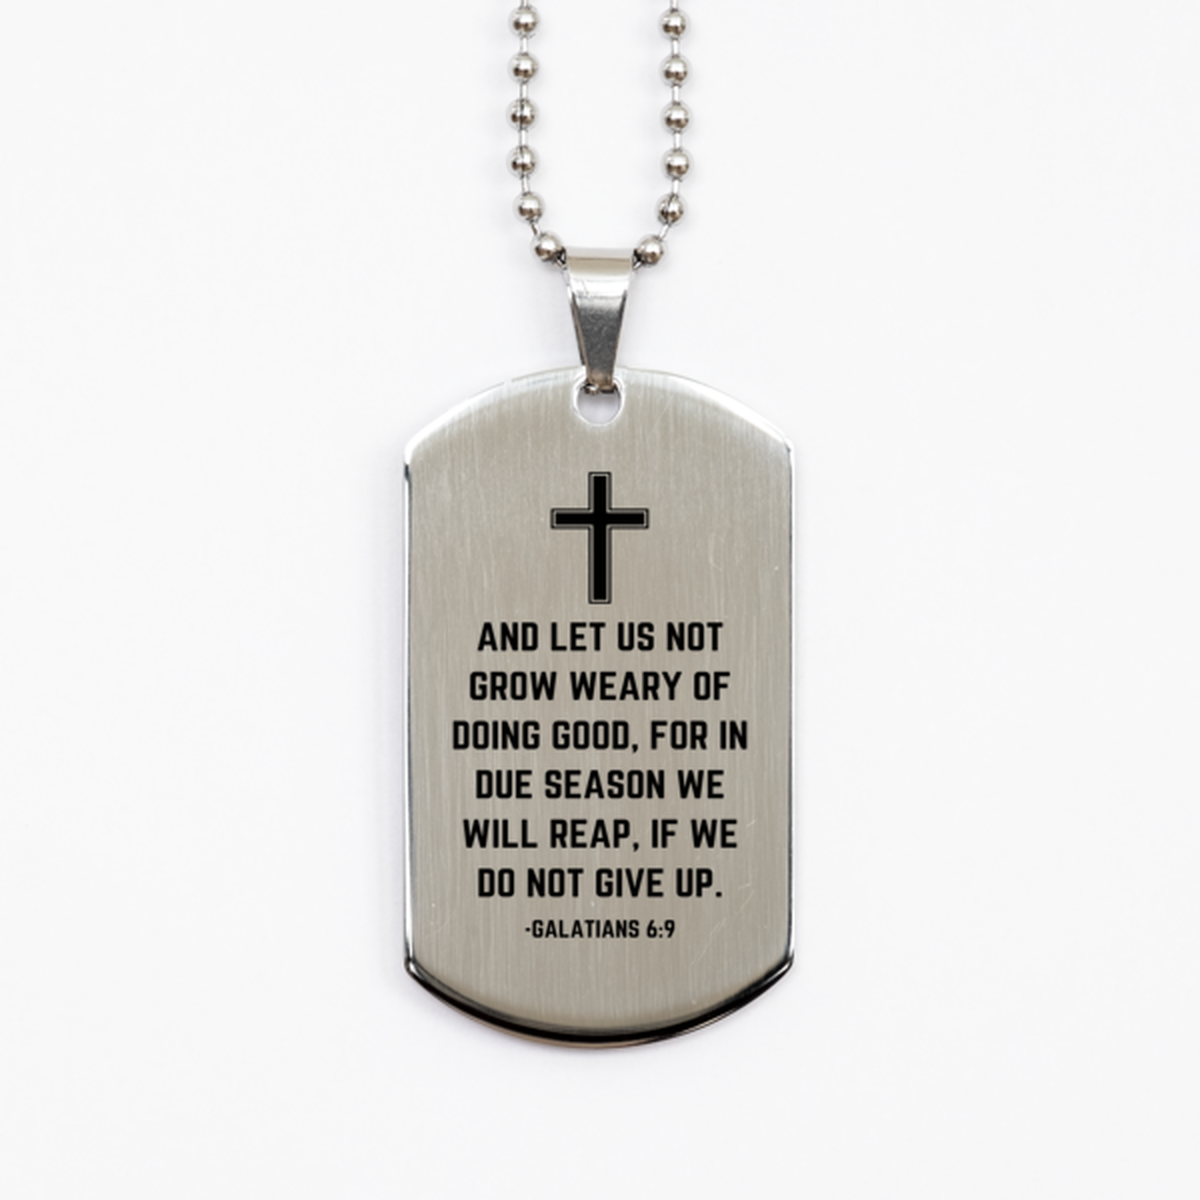 Baptism Gifts For Teenage Boys Girls, Christian Bible Verse Silver Dog Tag, And let us not grow weary, Confirmation Gifts, Bible Verse Necklace for Son, Godson, Grandson, Nephew